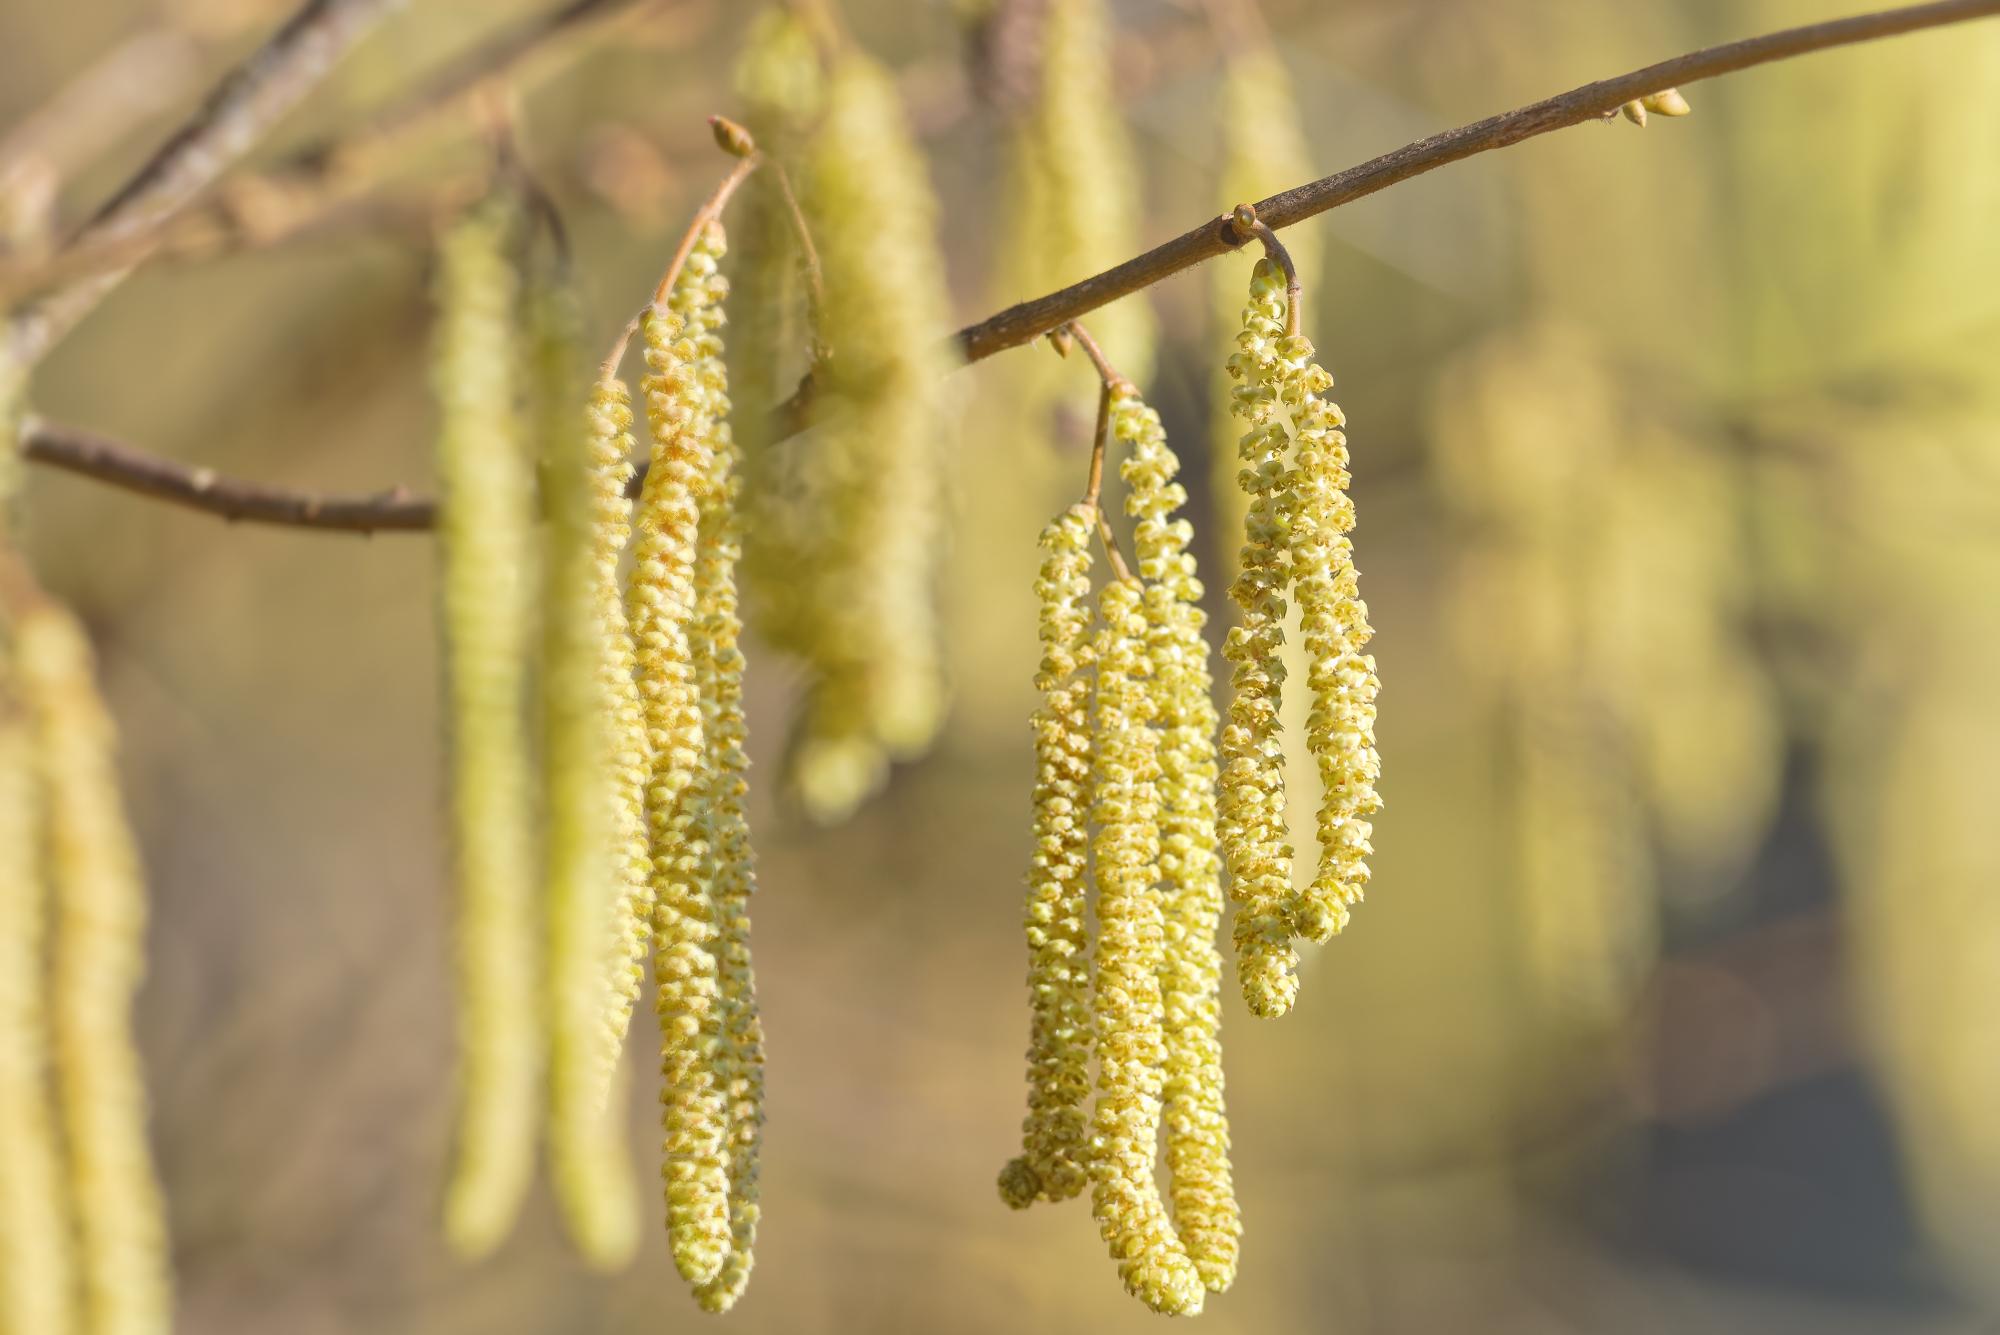 Cluster of golden hazel catkins hanging from branches